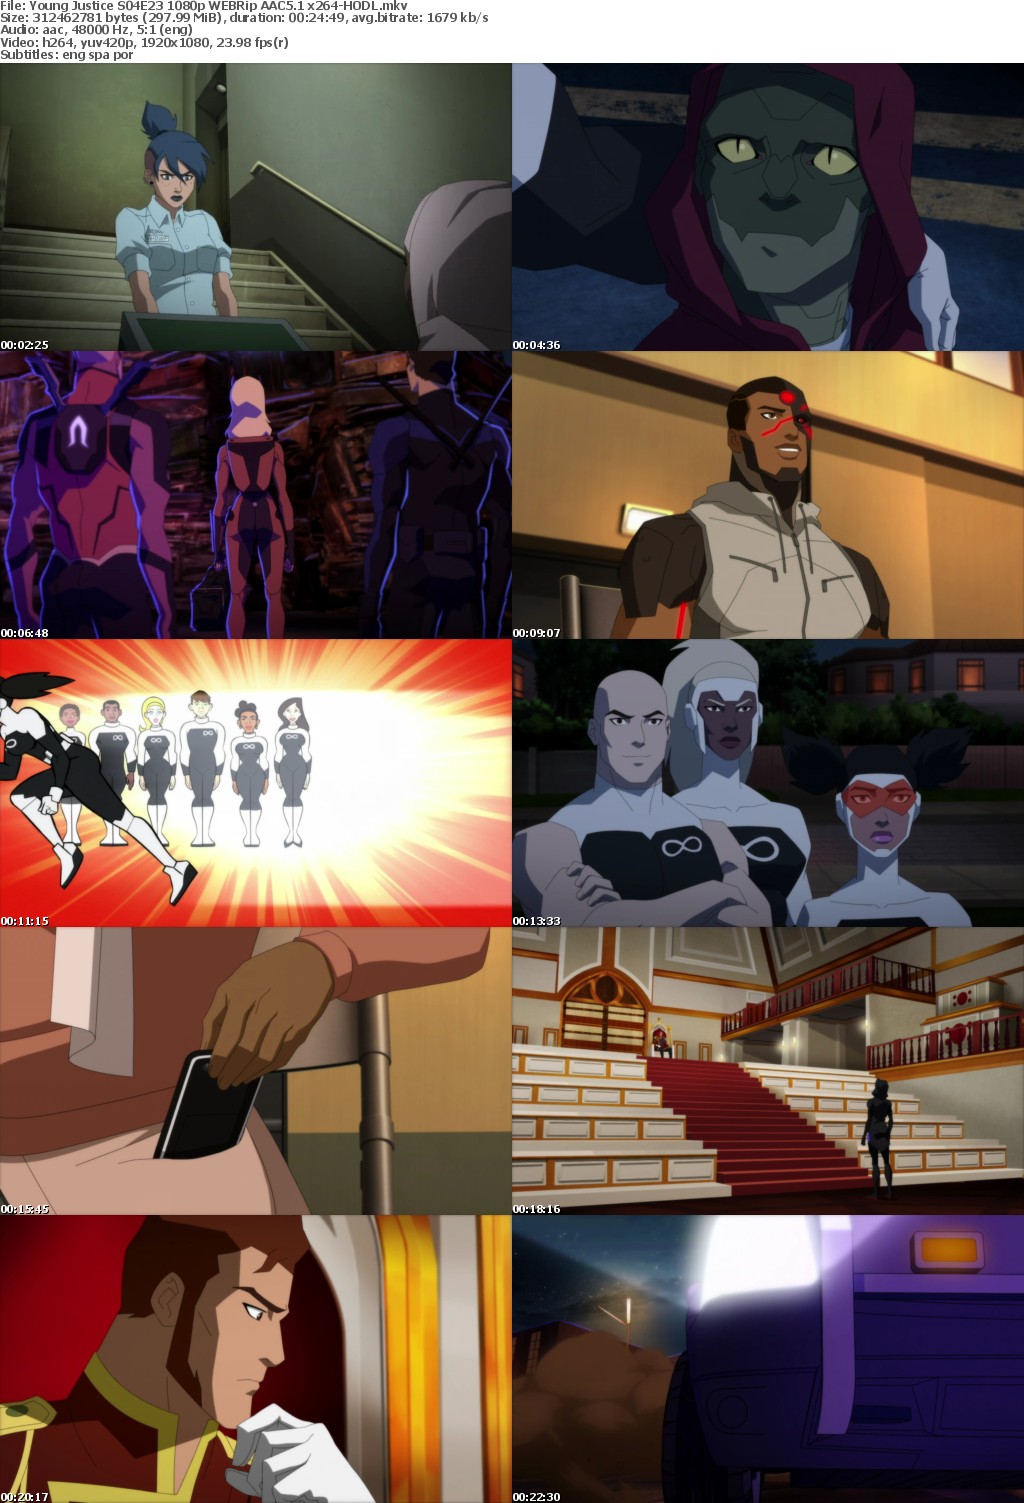 Young Justice S04E23 1080p WEBRip AAC5 1 x264-HODL